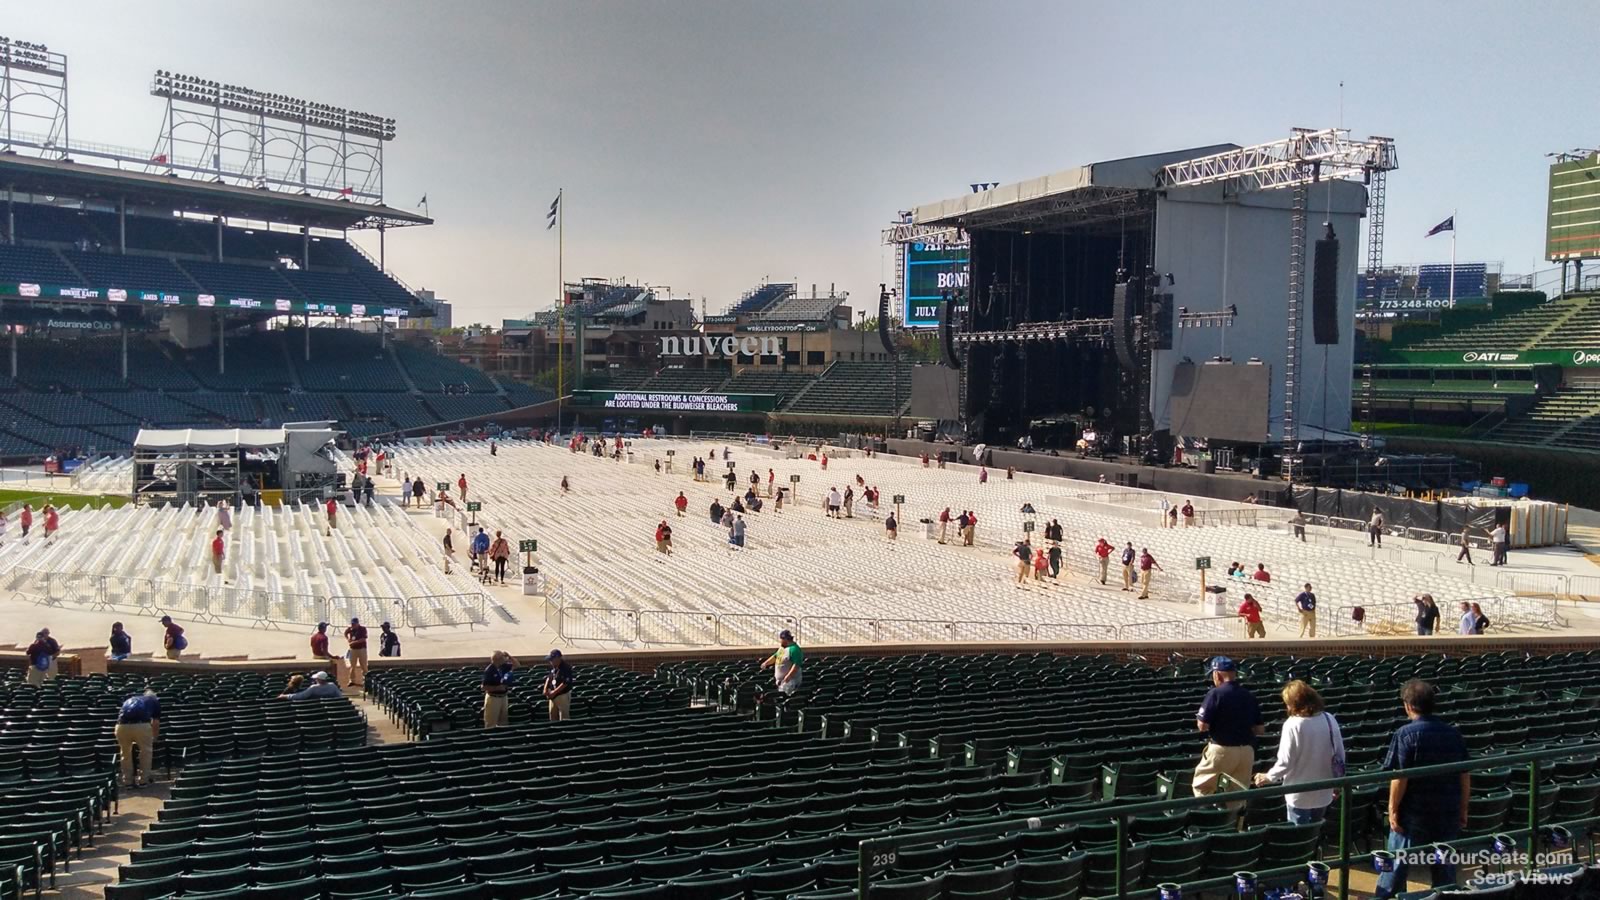 section 230, row 7 seat view  for concert - wrigley field